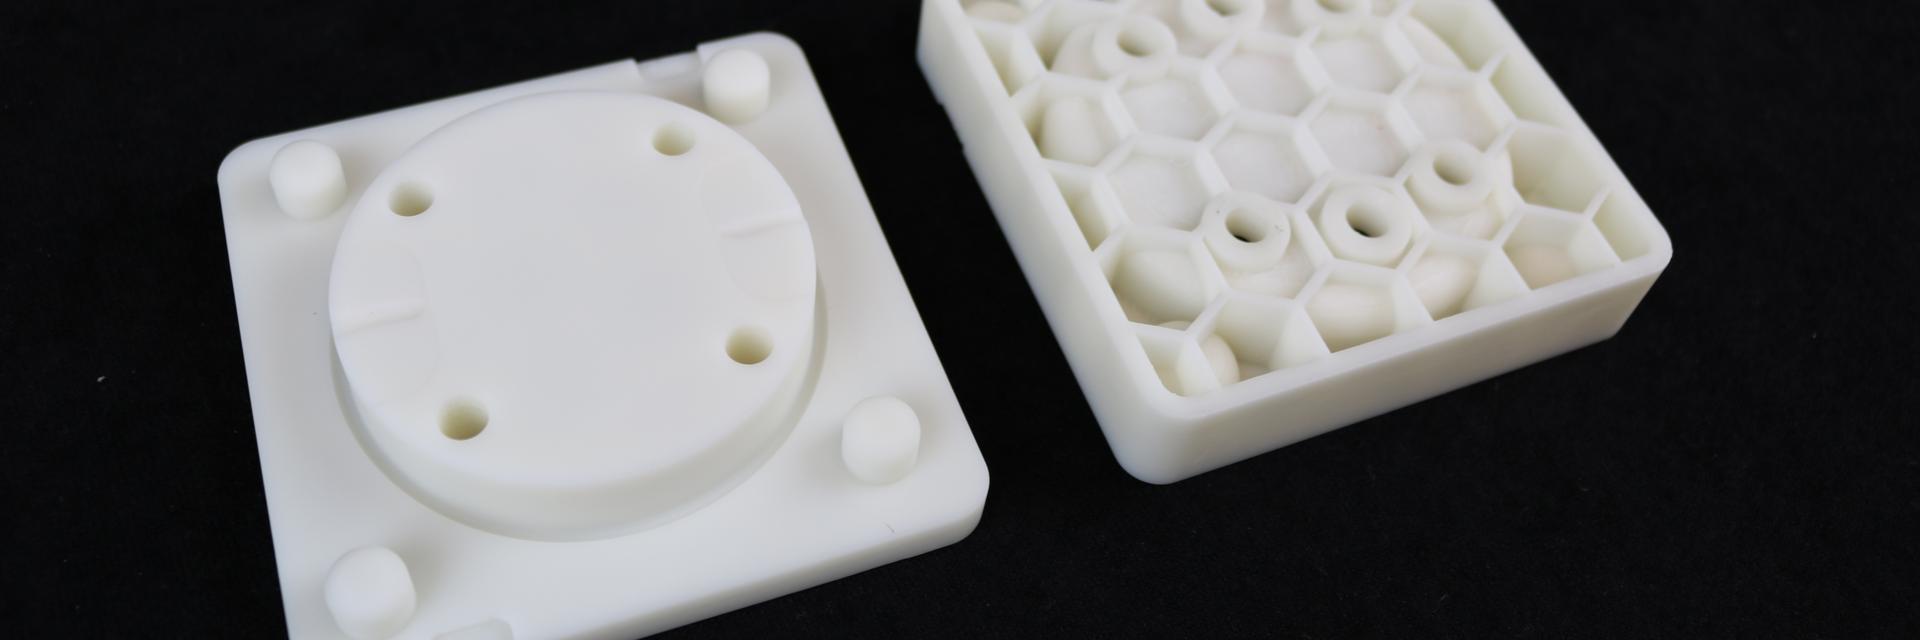 Two parts of a honeycomb prototype